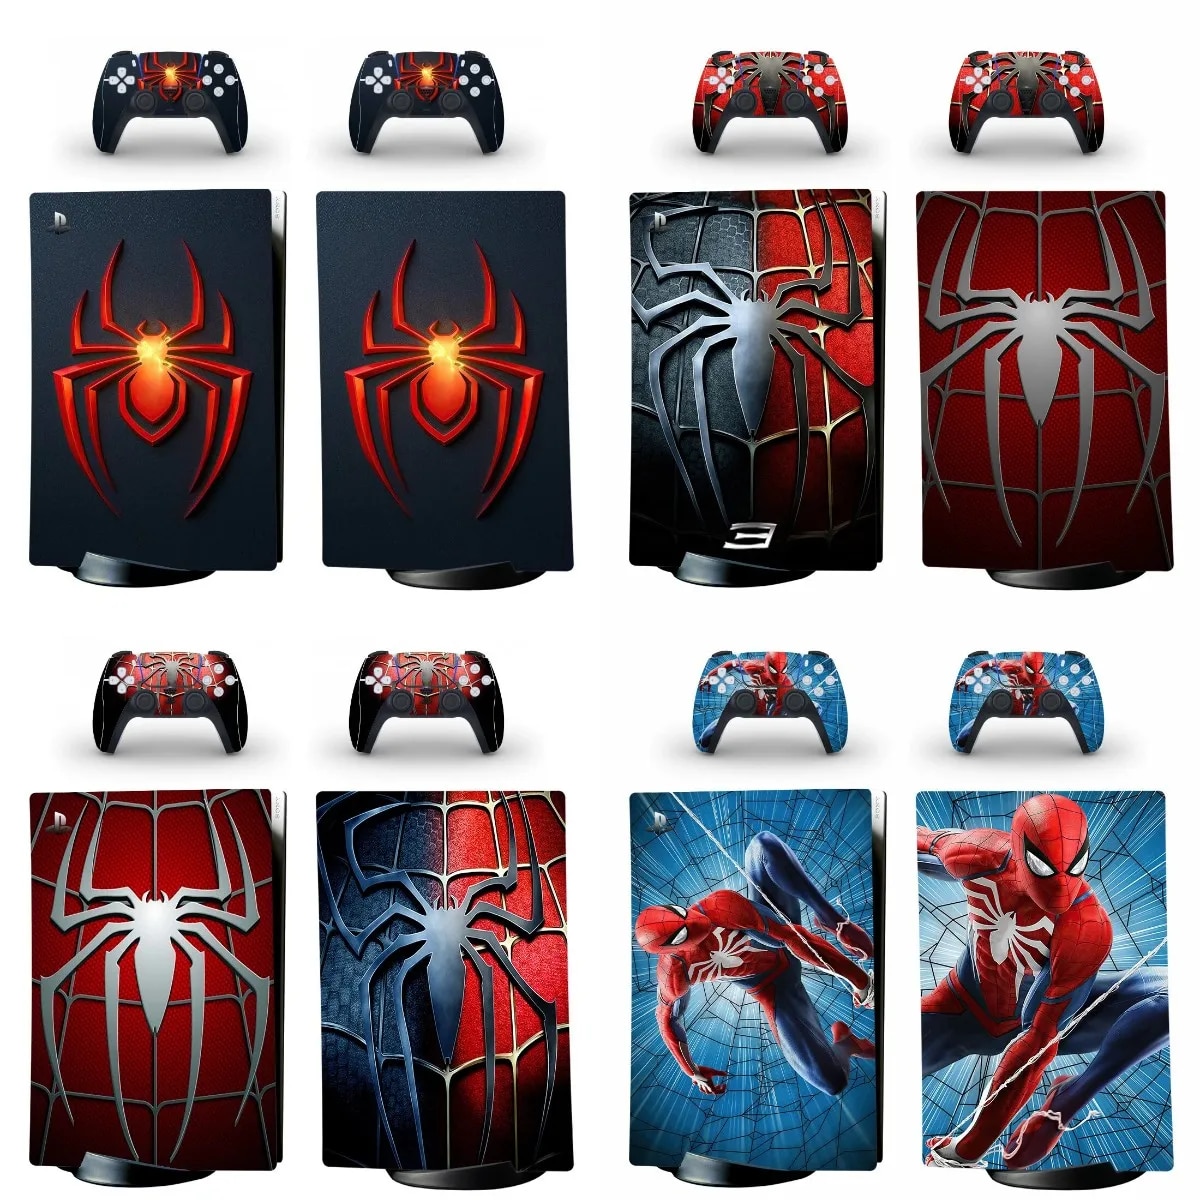 【Support-Cod】 Spiderman Ps5 Digital Version Skin Sticker Decal Cover For 5 Console Controller Skin Sticker Vinyl